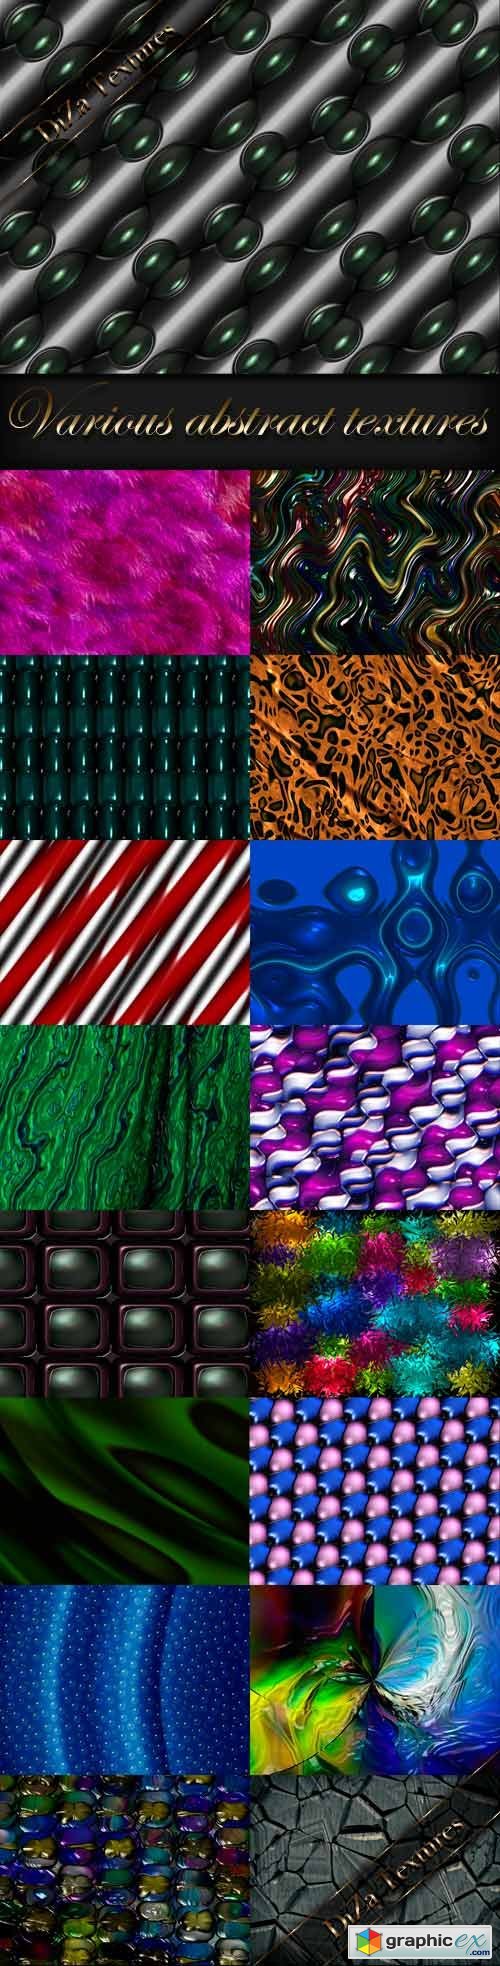 Various abstract textures